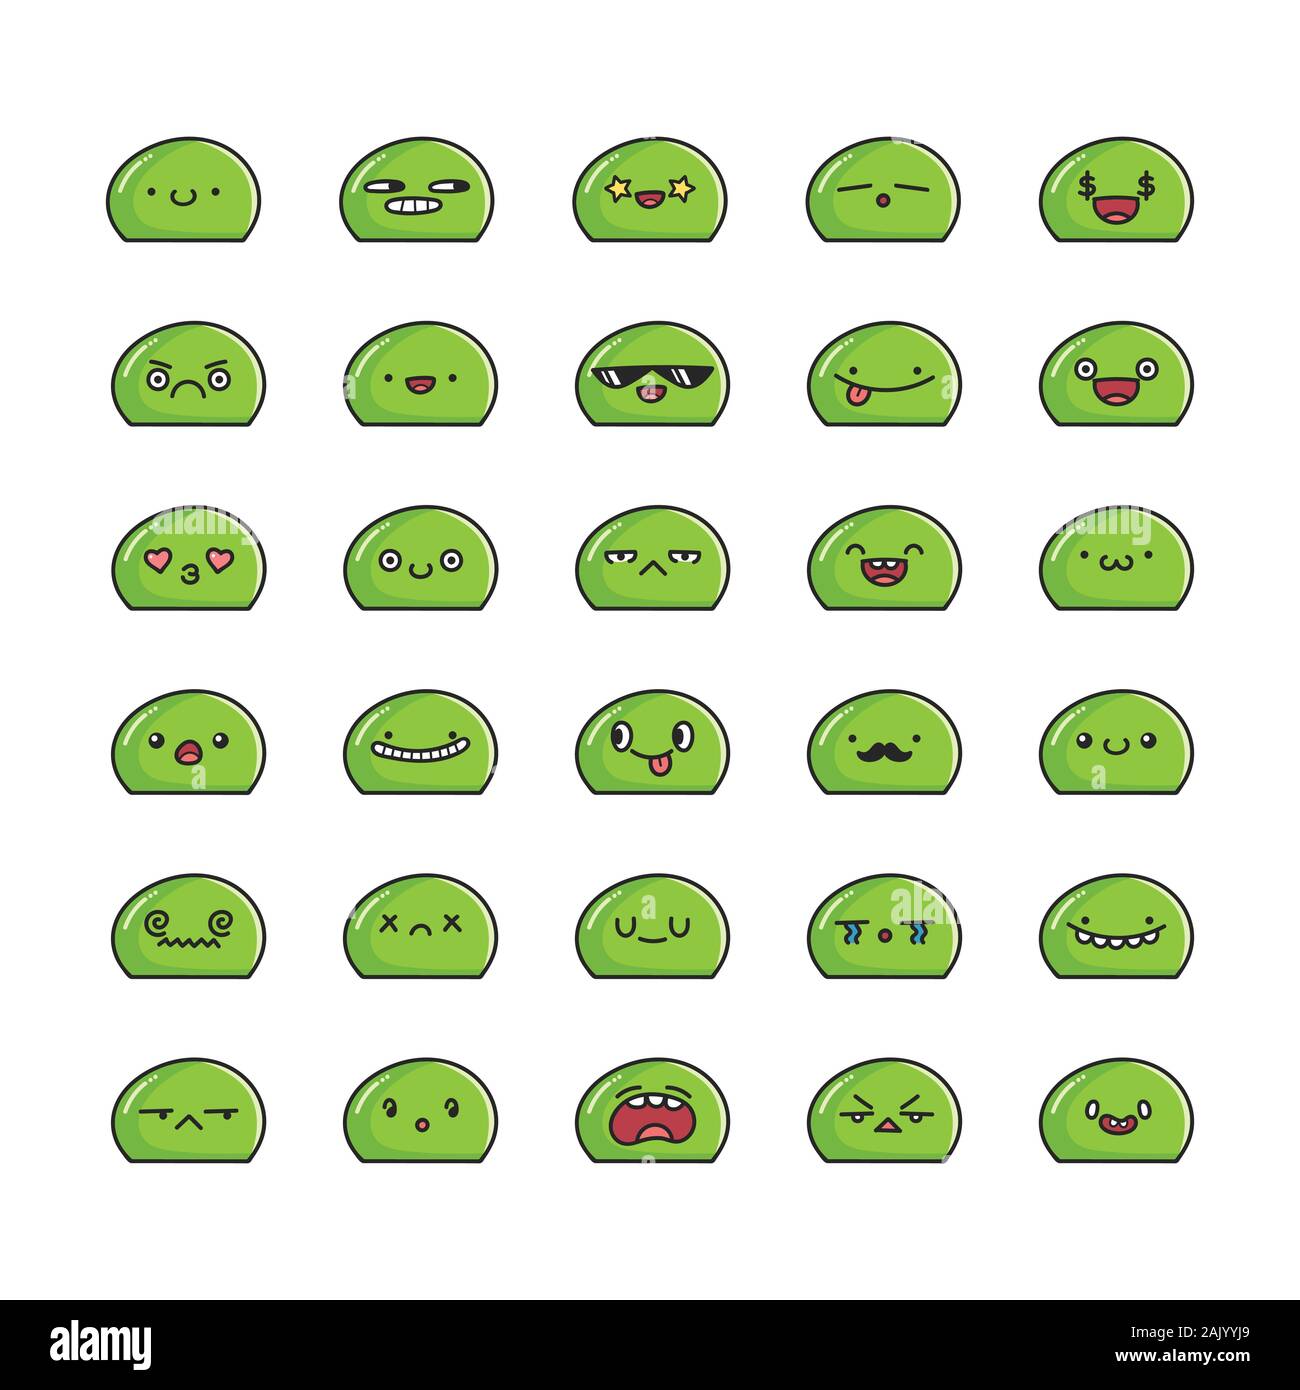 Collection of kawaii slime monster emoticons cartoons isolated on white Stock Vector